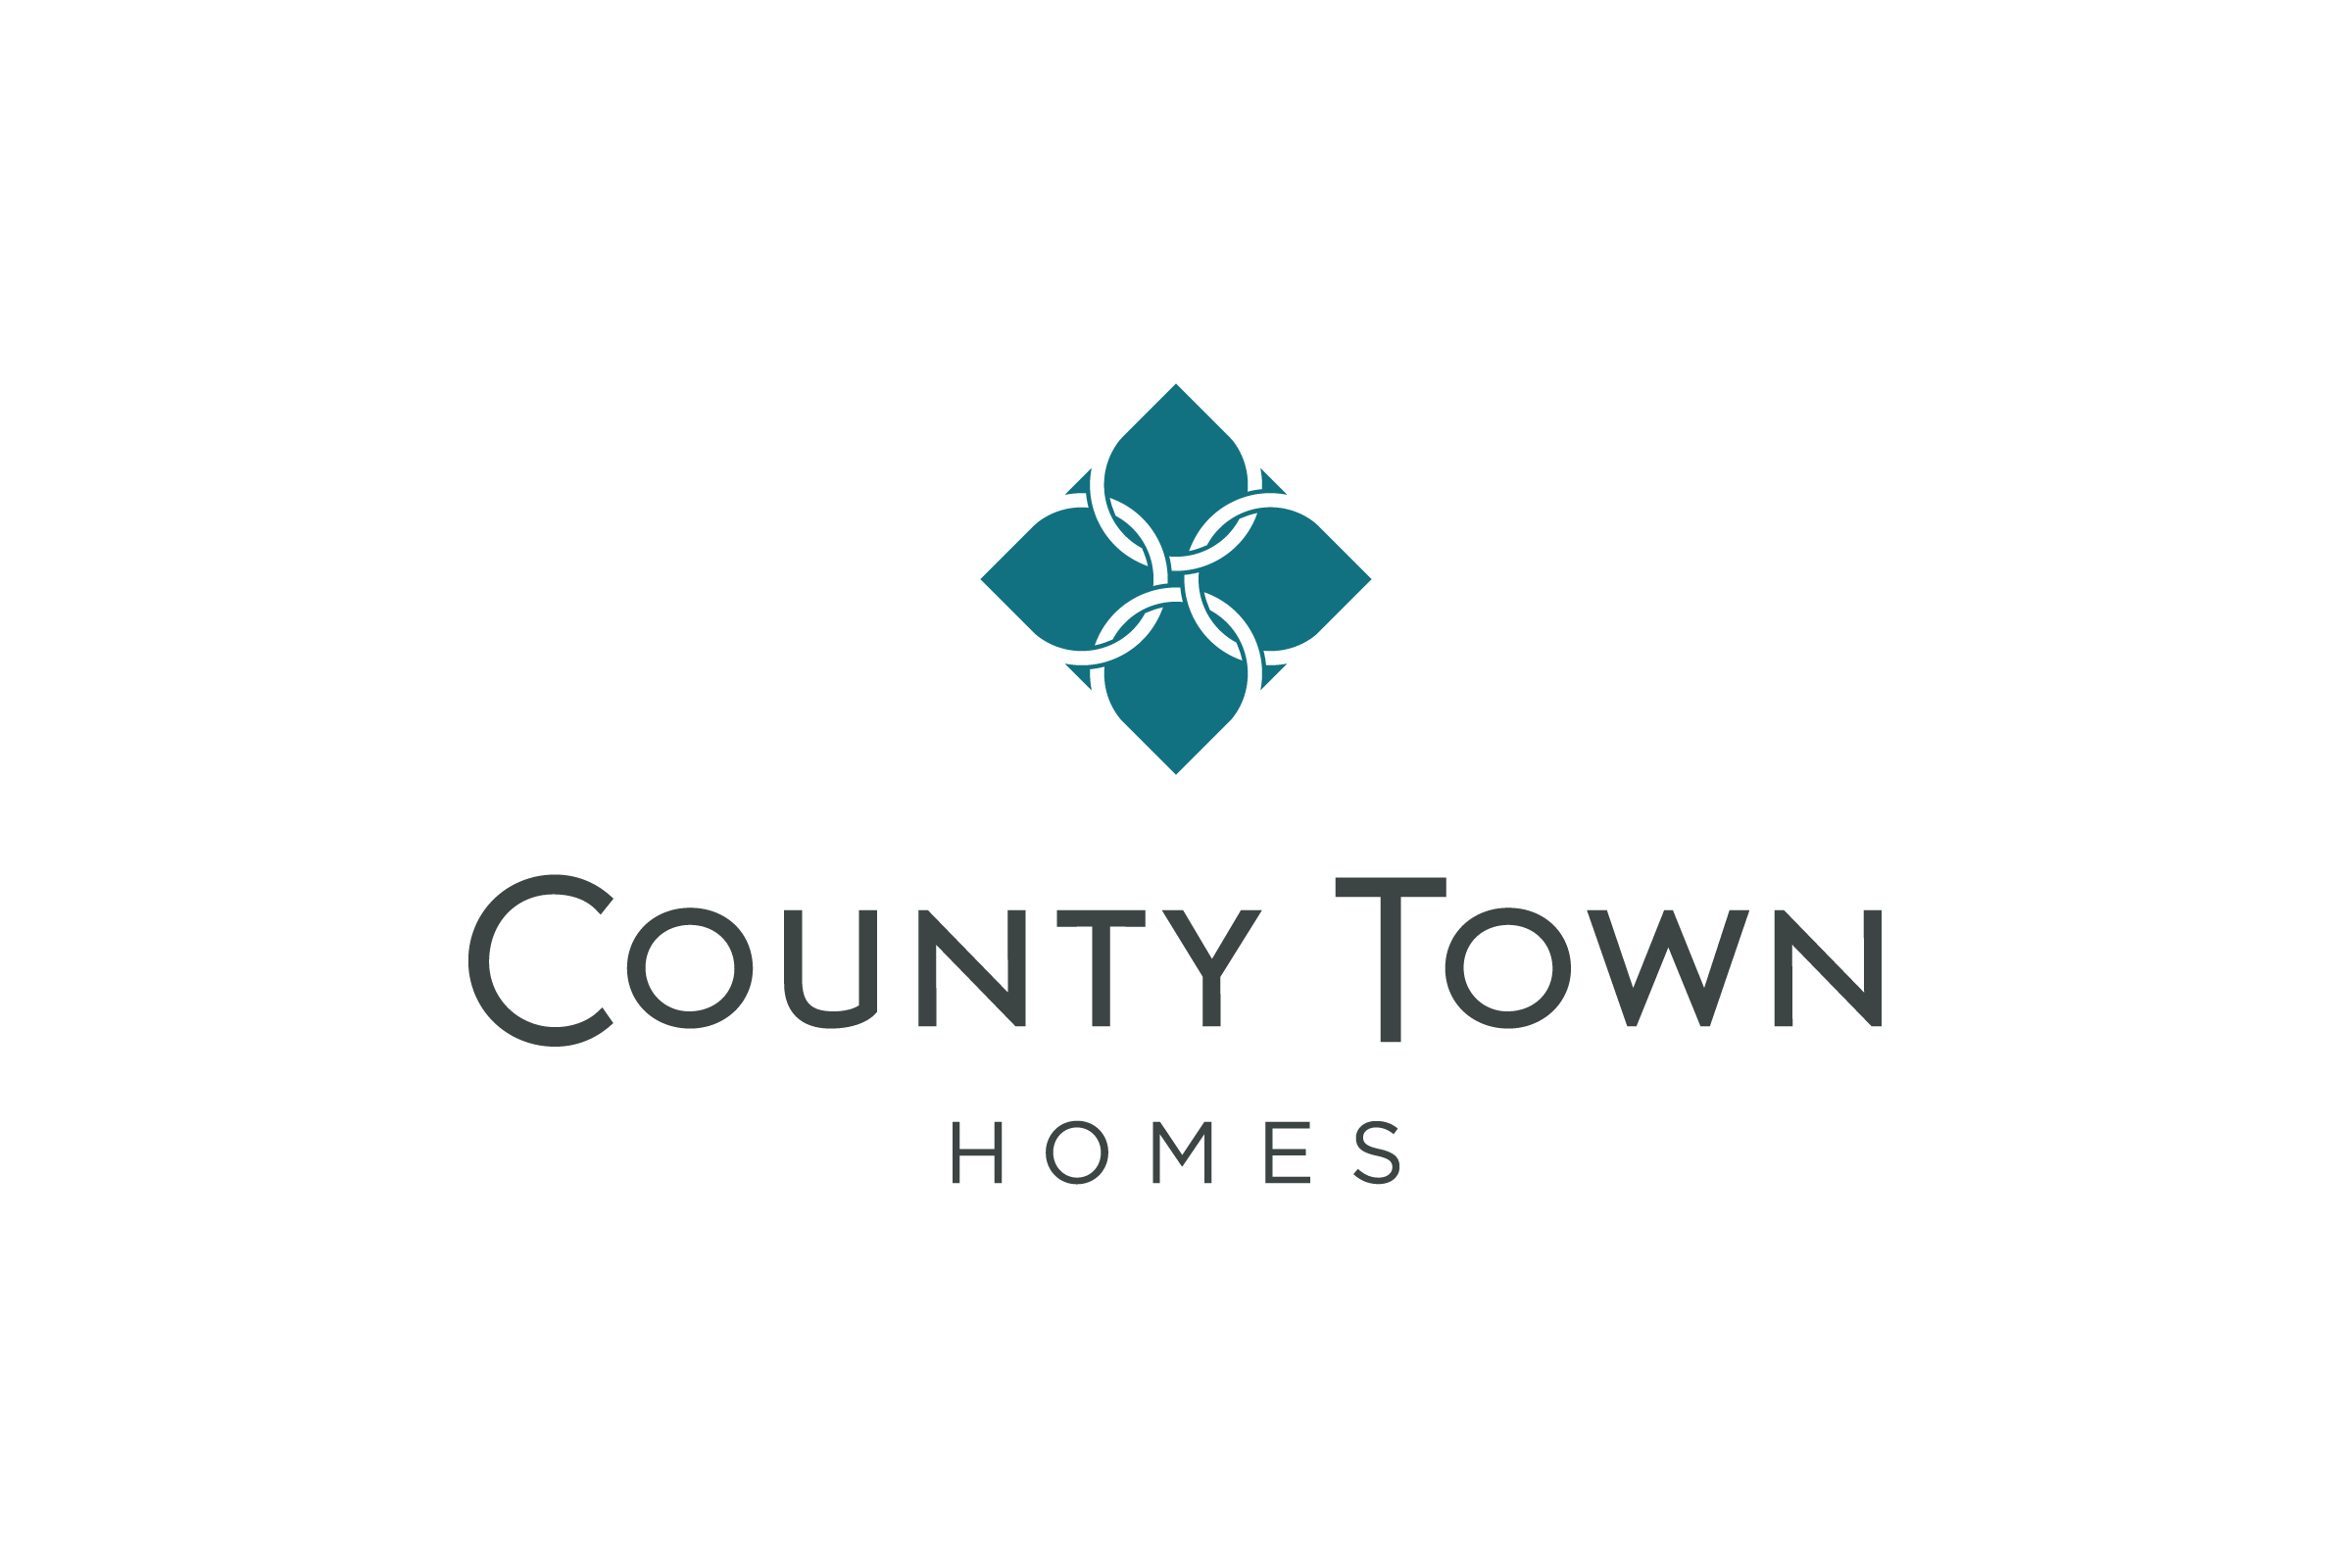 County Town Homes Brand Identity by Peek Creative Limited